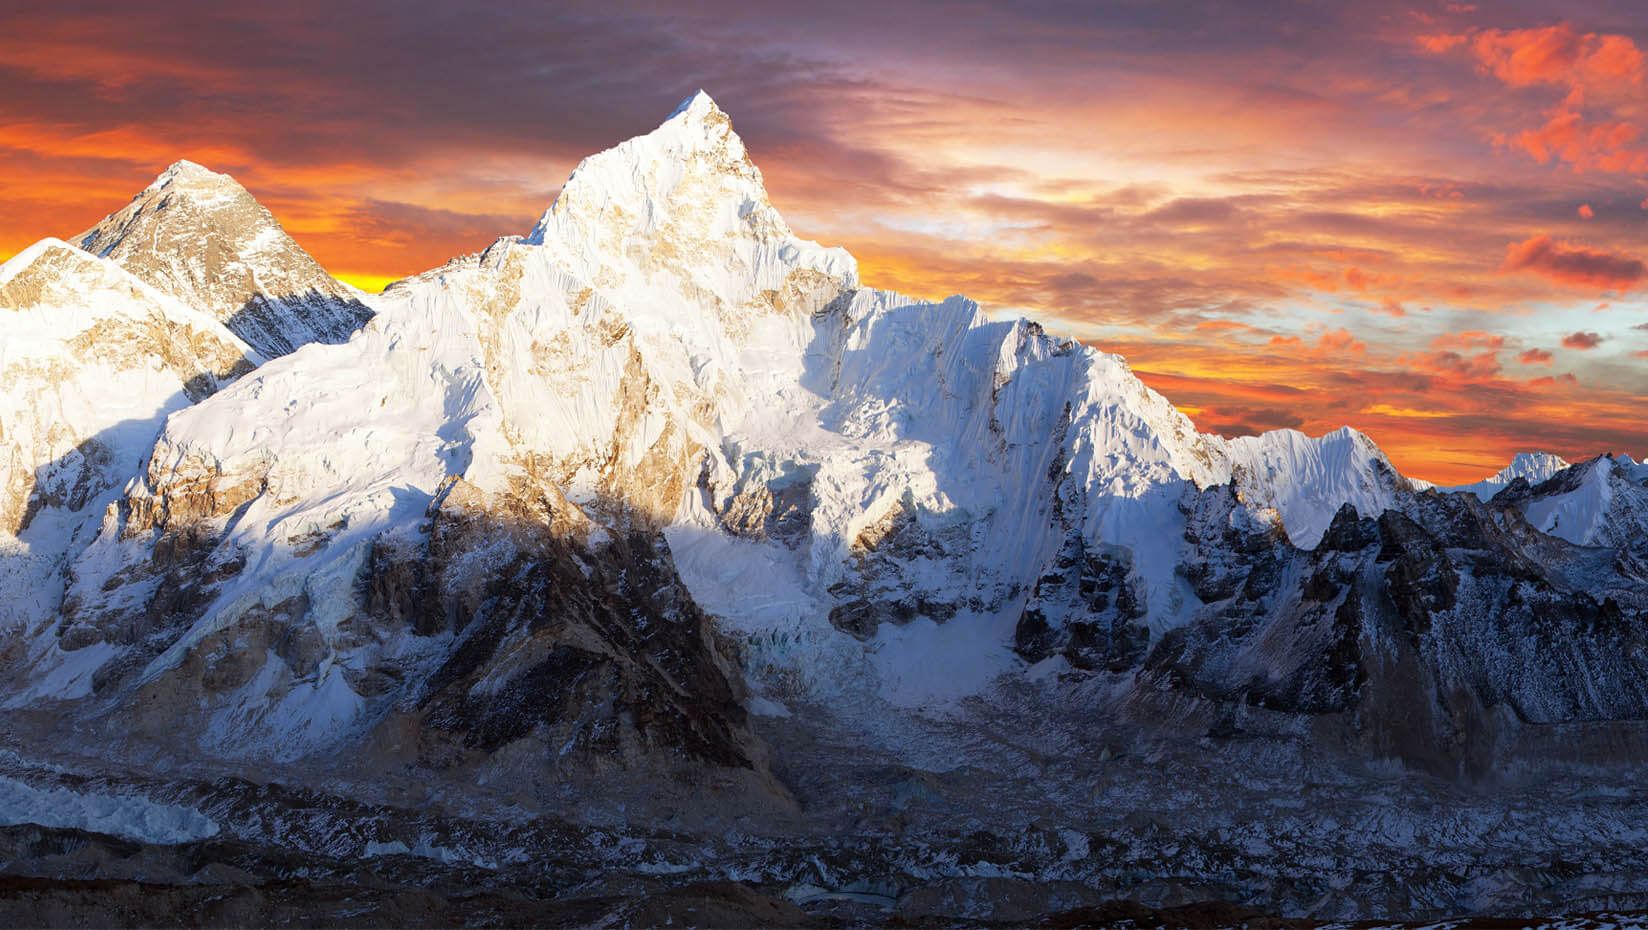 Climate change, human impacts altering Everest faster, more